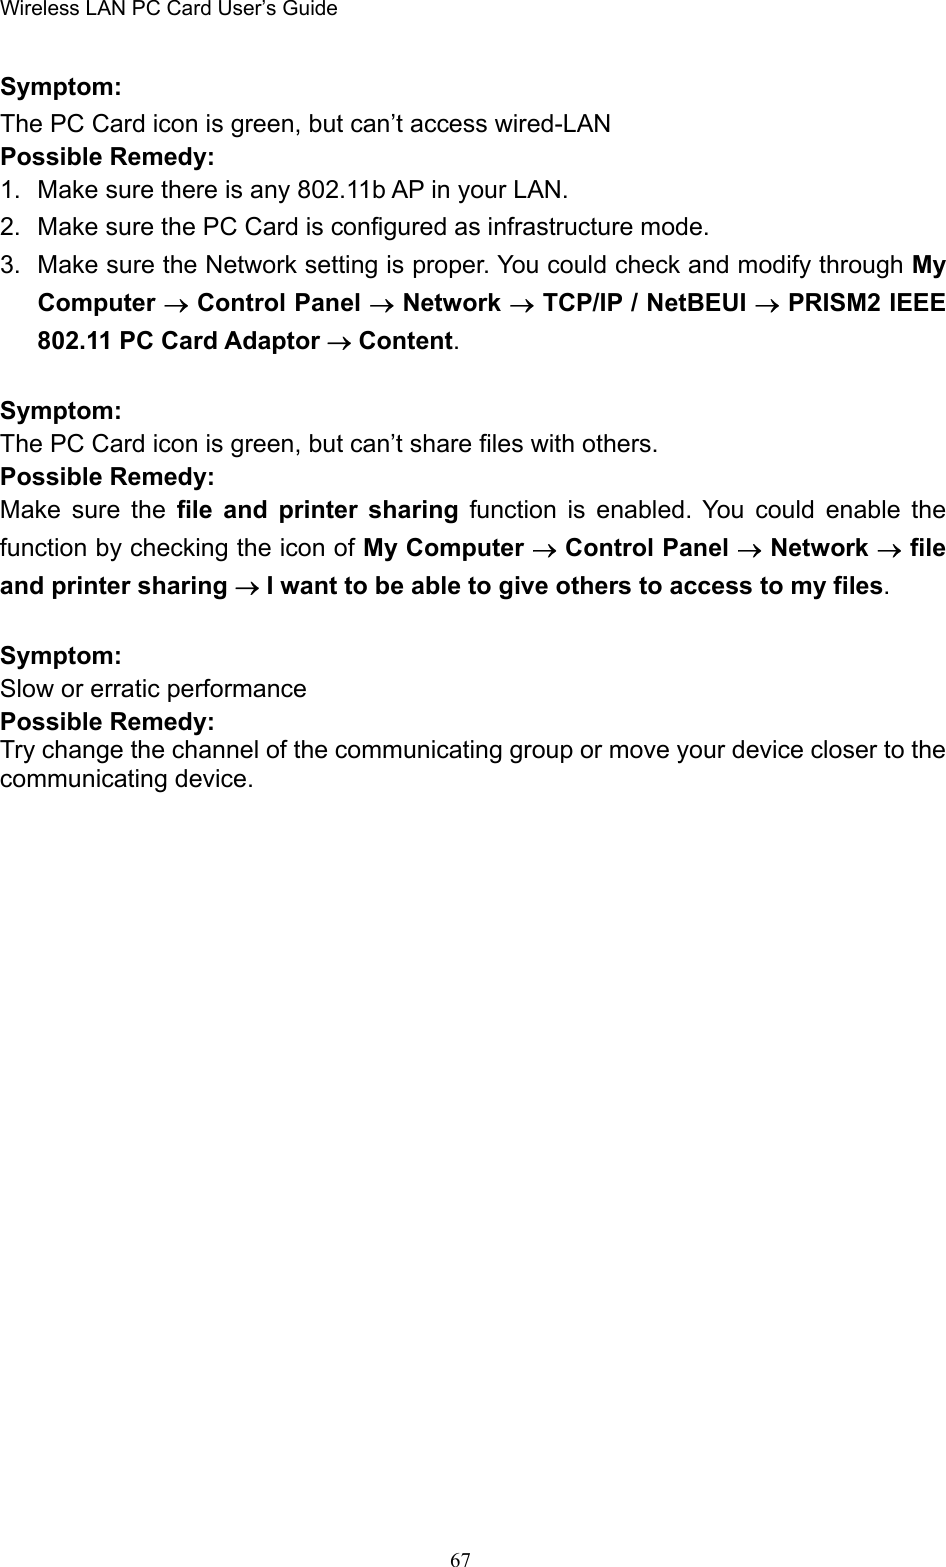 Wireless LAN PC Card User’s Guide67Symptom:The PC Card icon is green, but can’t access wired-LANPossible Remedy:1.  Make sure there is any 802.11b AP in your LAN.2.  Make sure the PC Card is configured as infrastructure mode.3.  Make sure the Network setting is proper. You could check and modify through MyComputer → Control Panel → Network → TCP/IP / NetBEUI → PRISM2 IEEE802.11 PC Card Adaptor → Content.Symptom:The PC Card icon is green, but can’t share files with others.Possible Remedy:Make sure the file and printer sharing function is enabled. You could enable thefunction by checking the icon of My Computer → Control Panel → Network → fileand printer sharing → I want to be able to give others to access to my files.Symptom:Slow or erratic performancePossible Remedy:Try change the channel of the communicating group or move your device closer to thecommunicating device.